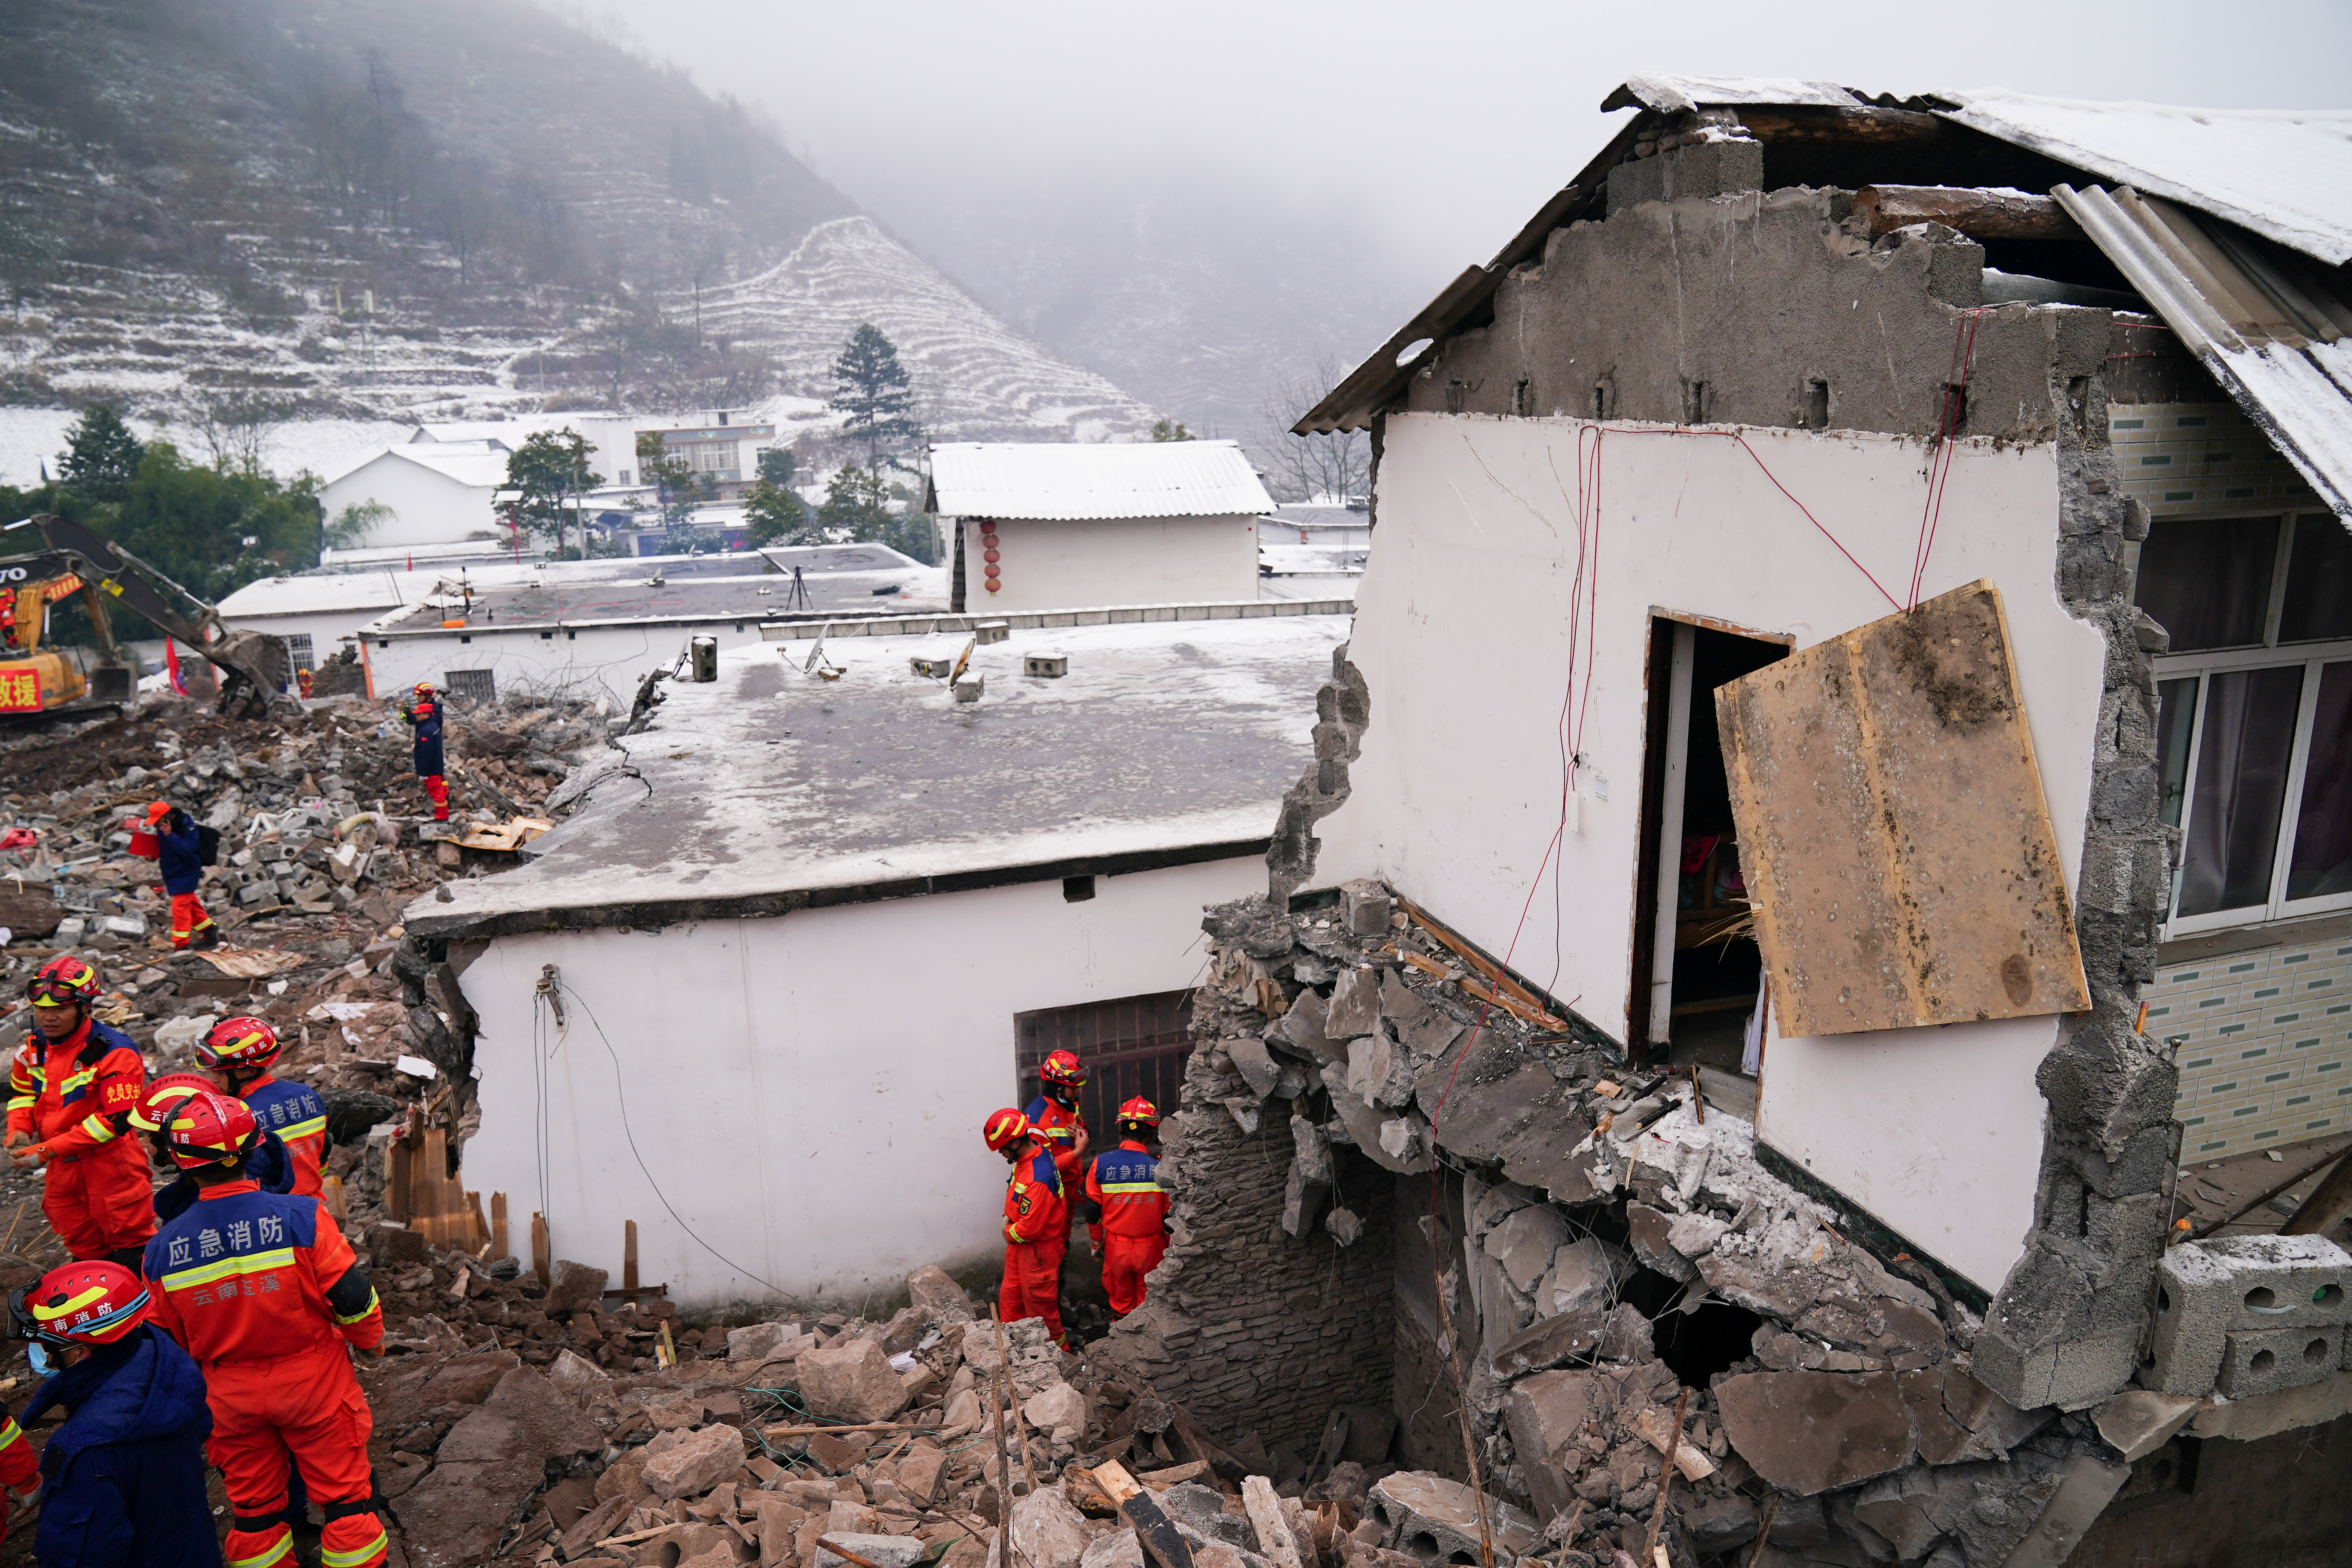 Rescue workers search for survivors near damaged houses after a landslide hit Zhenxiong county in Zhaotong